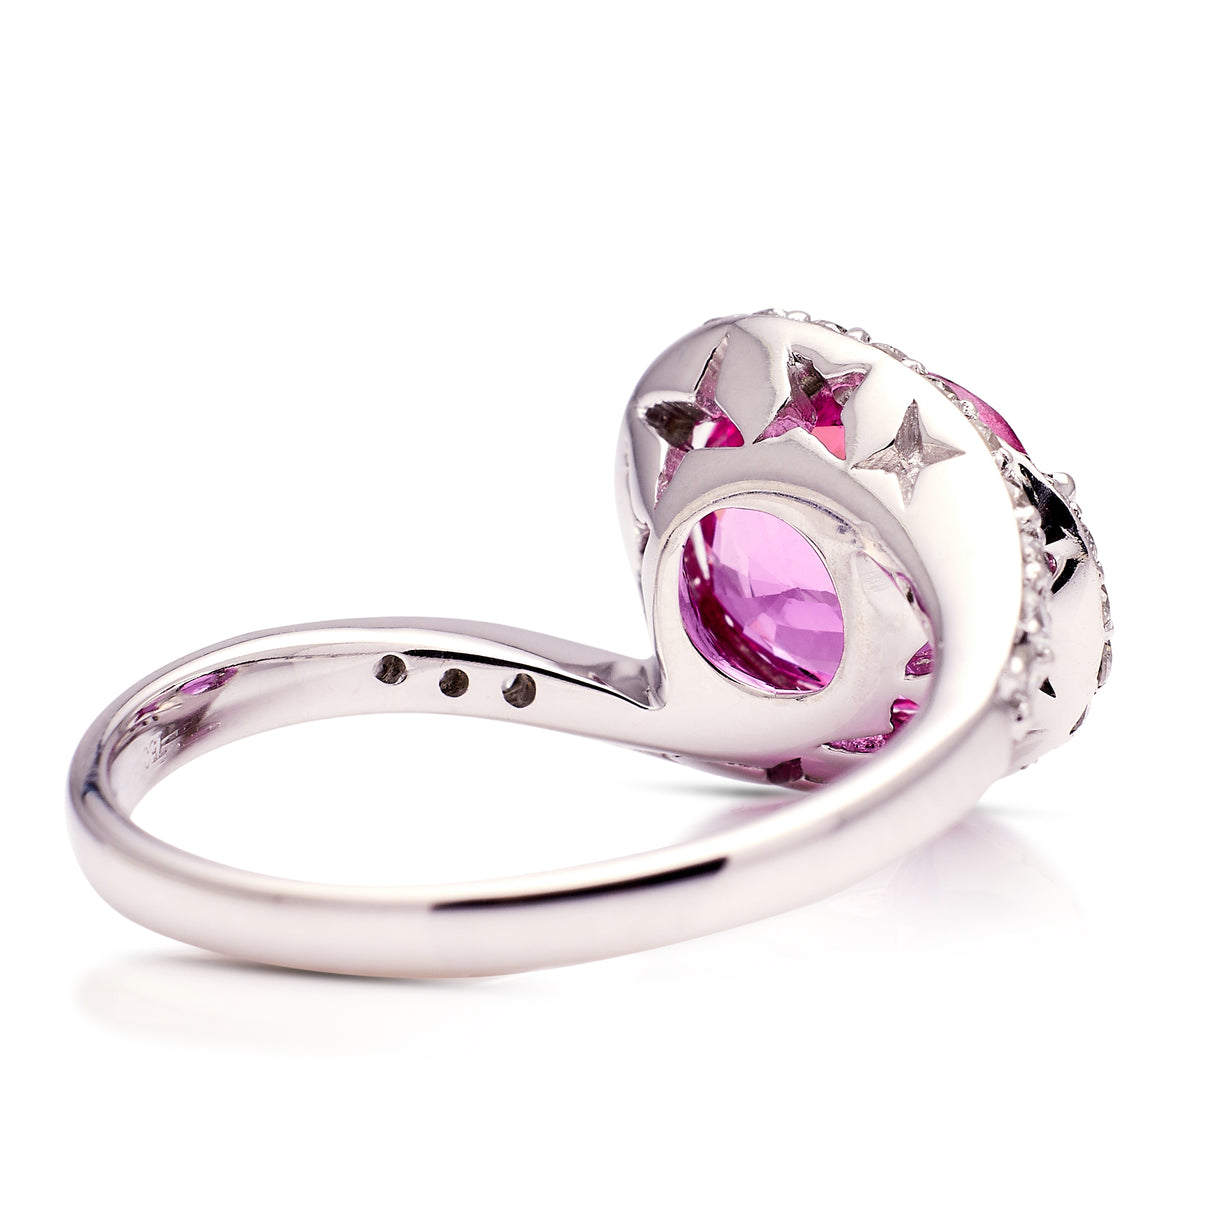 Pink sapphire and diamond engagement ring, rear view. 